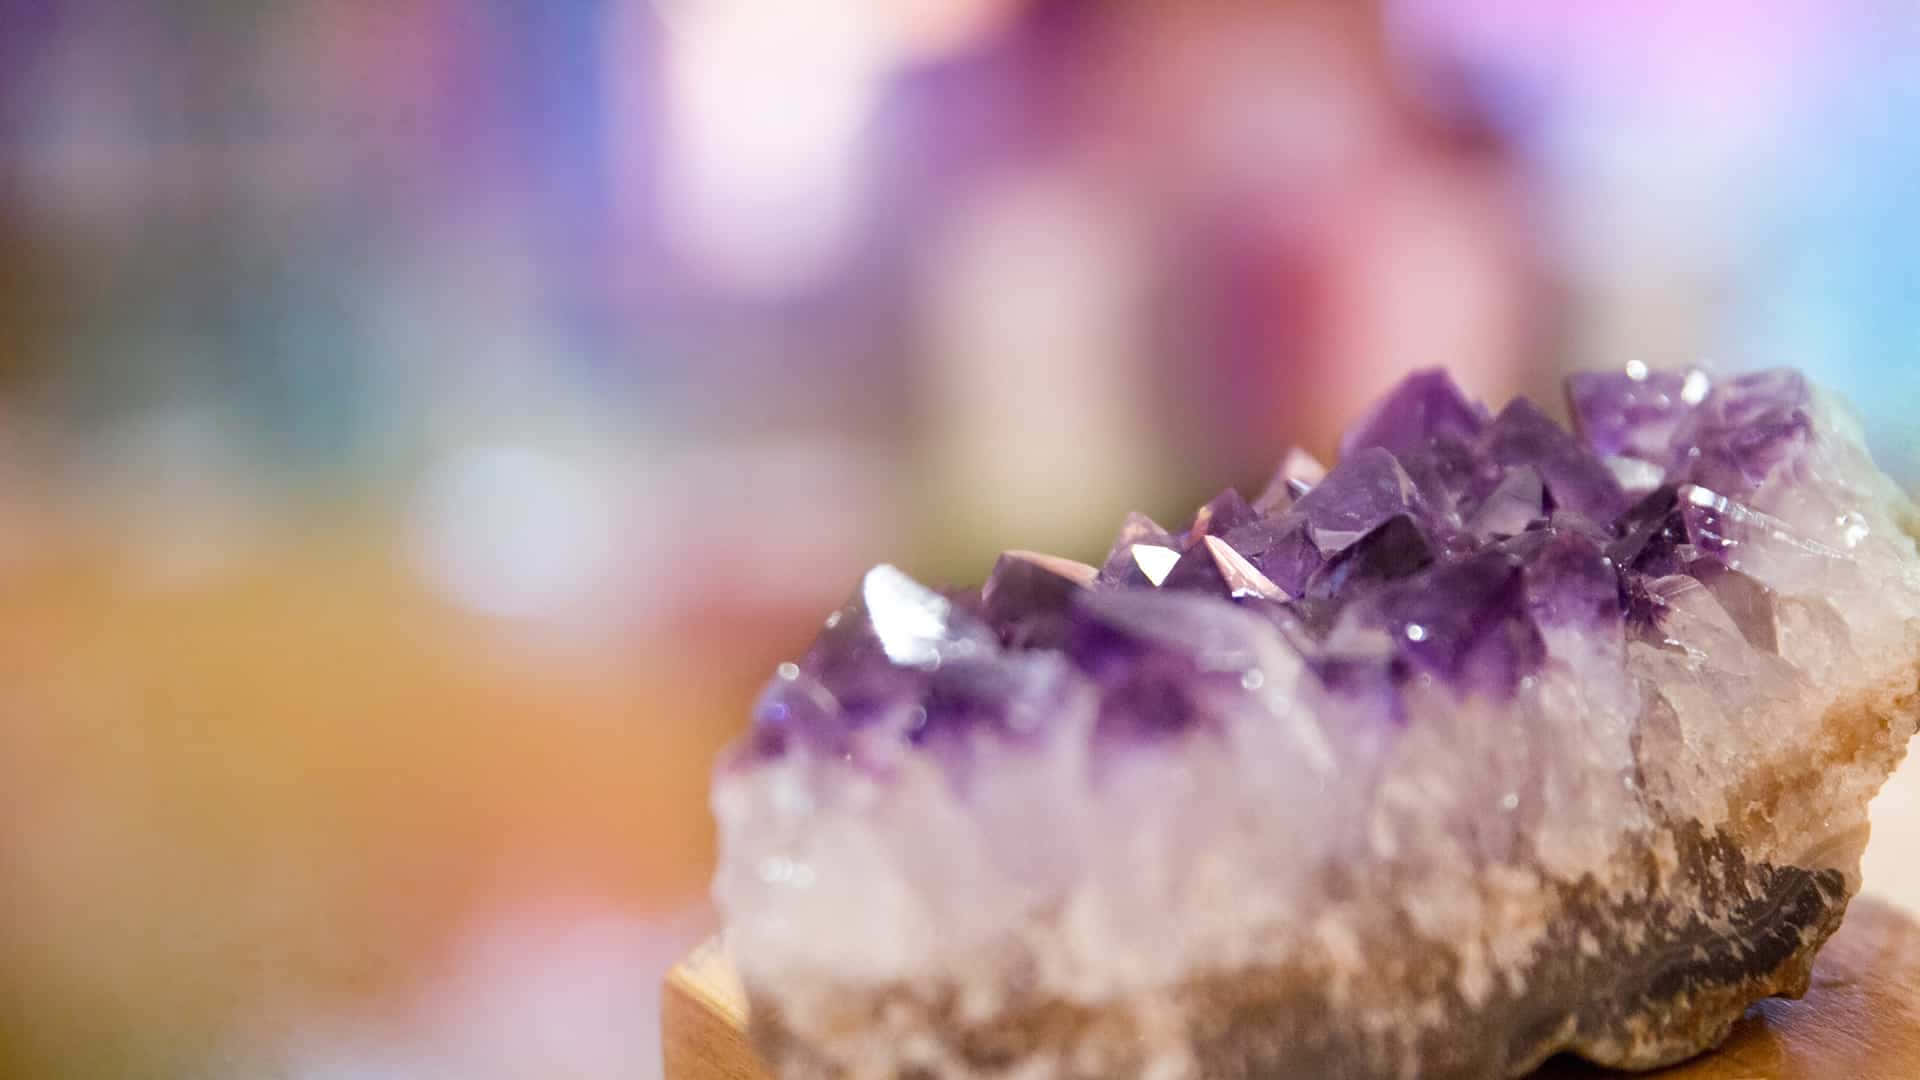 A beautiful Crystal radiating in the sunlight